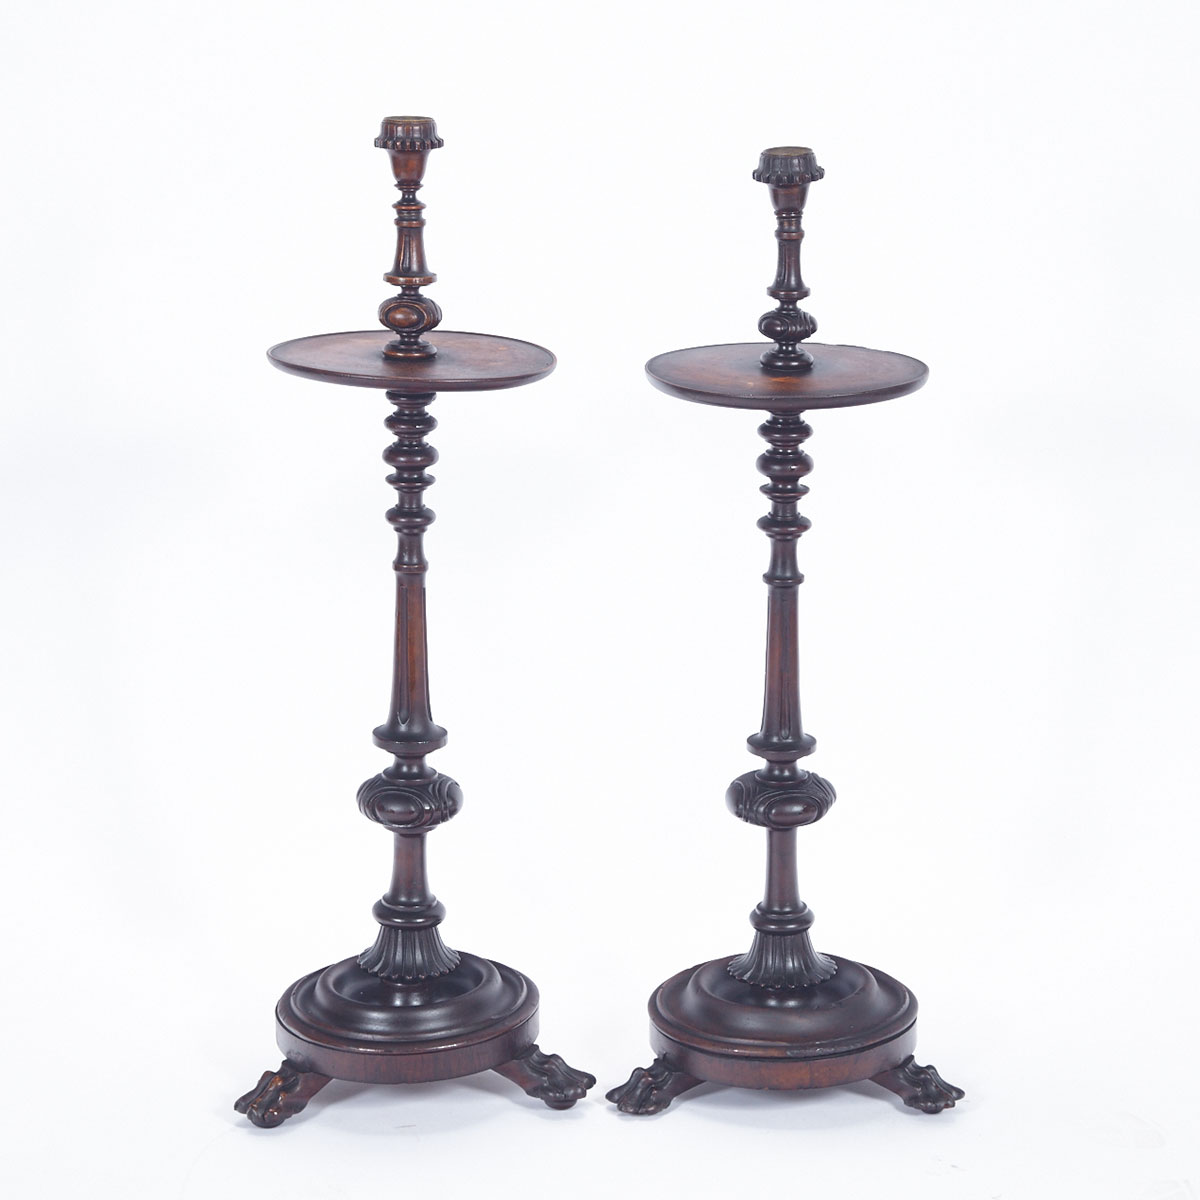 Pair of Victorian Turned and Carved Mahogany Tall Candle Stands, Wilkinson & Son, London, mid 19th century 